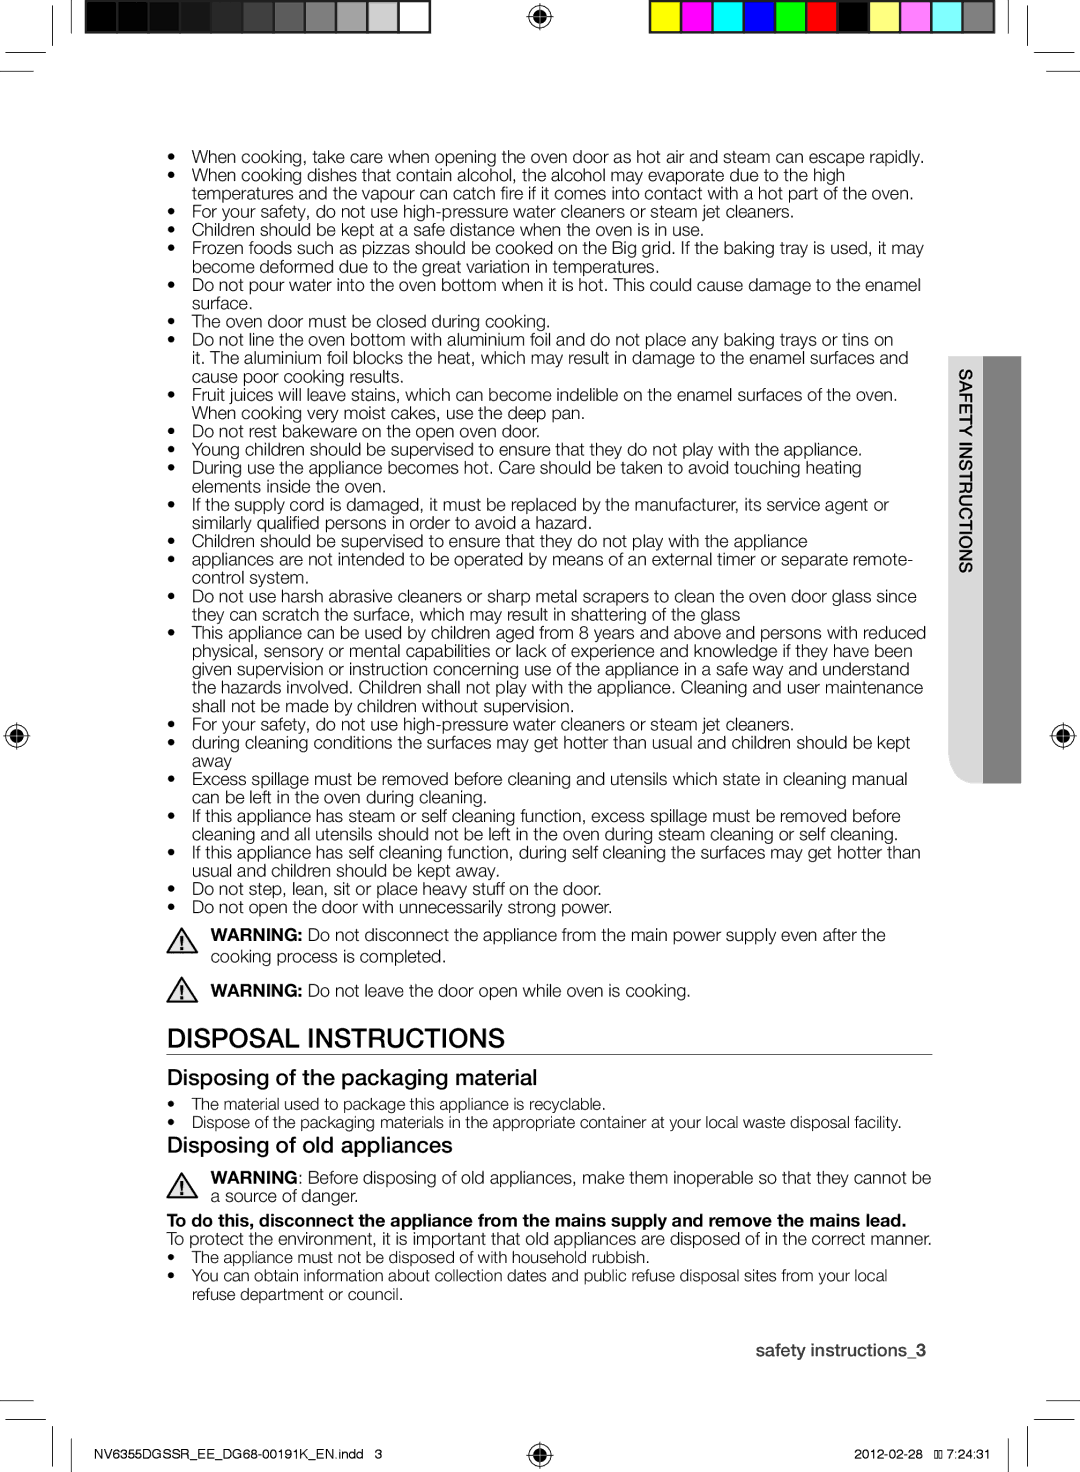 Samsung NV6355DGSSR/EE manual Disposal Instructions, Disposing of the packaging material, Disposing of old appliances 